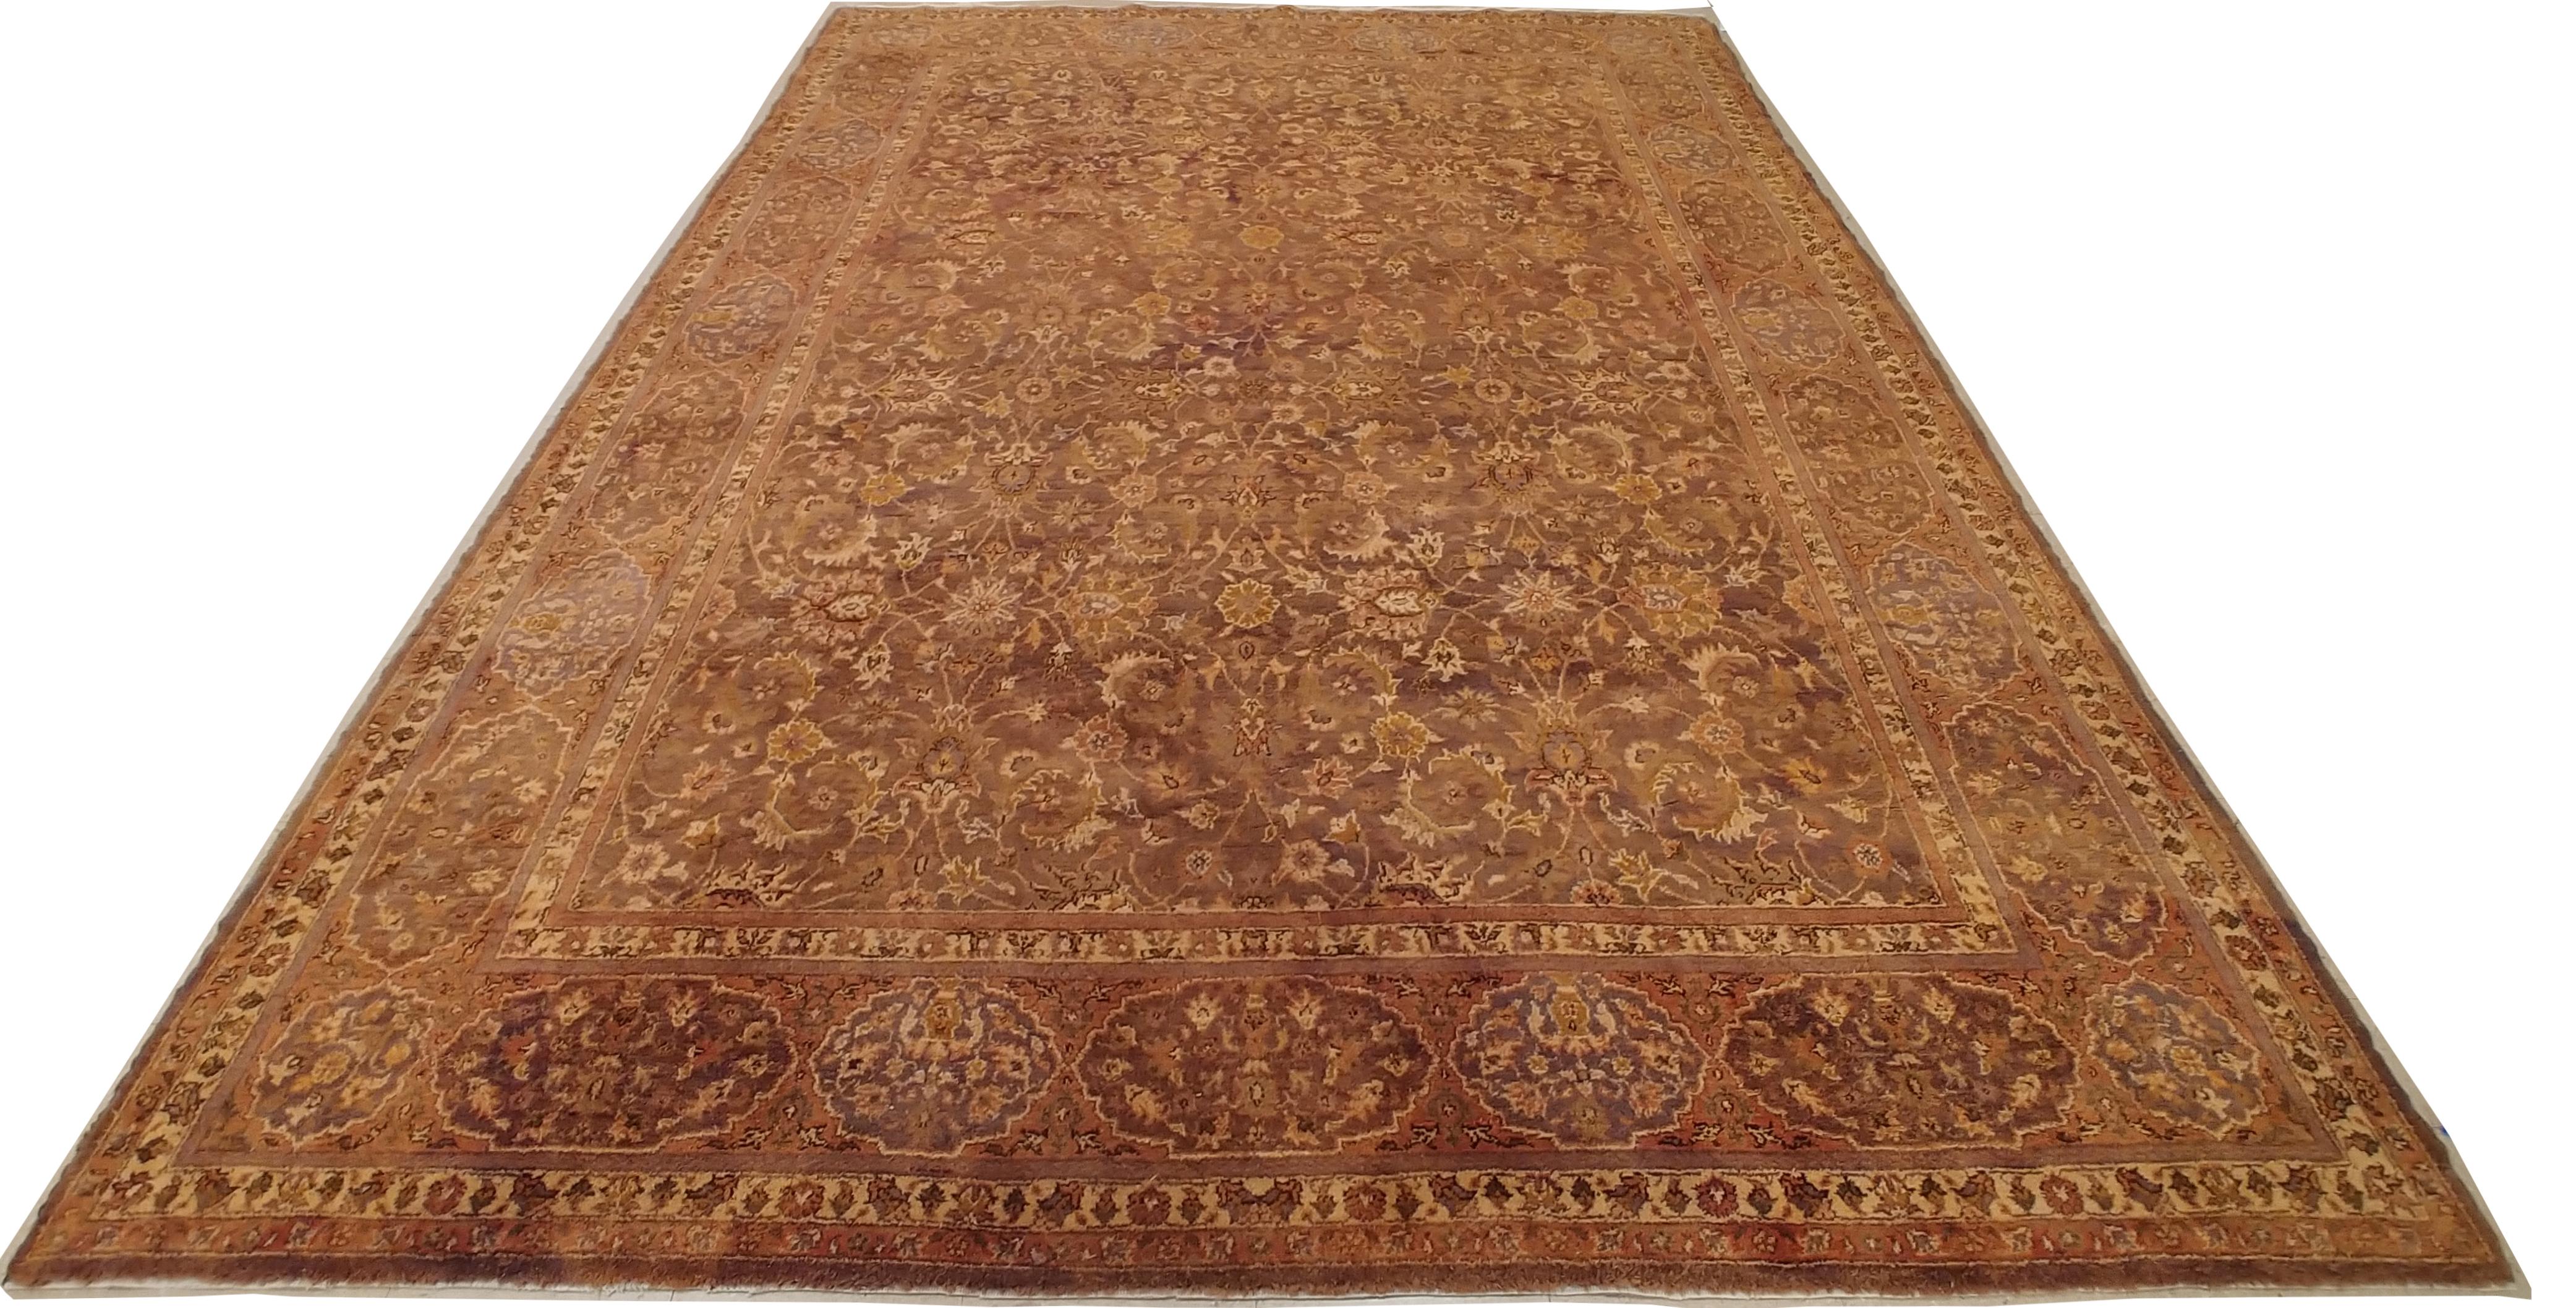 Antique Tabriz Persian Carpet Handmade Oriental Rug Gold, Brown, Peach and Taupe For Sale 1